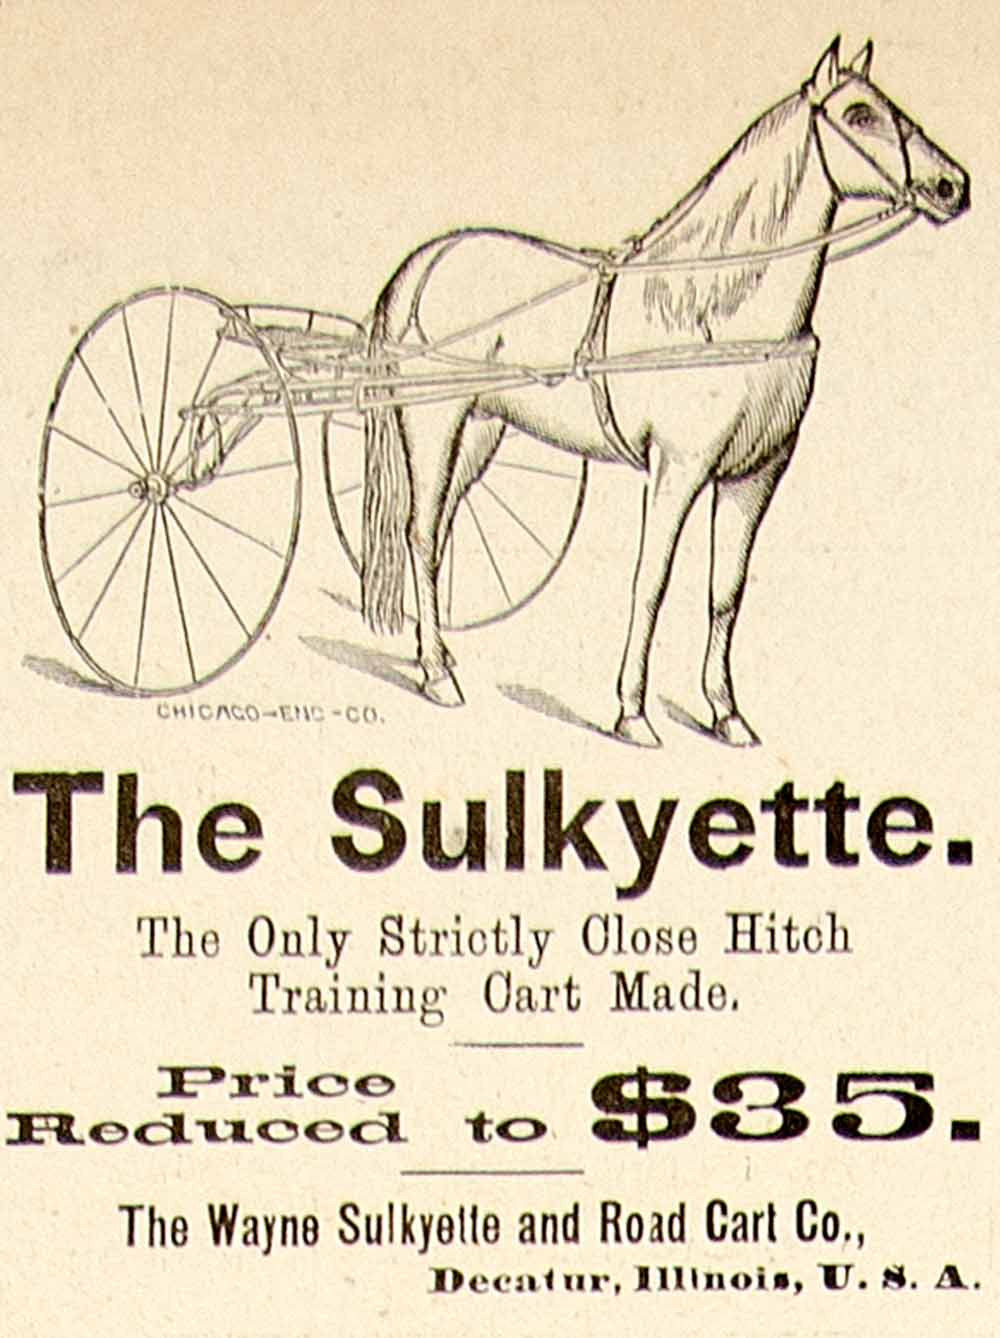 1896 Ad Antique Wayne Sulkyette Horse Road Cart Racing Training Decatur IL YAHB1